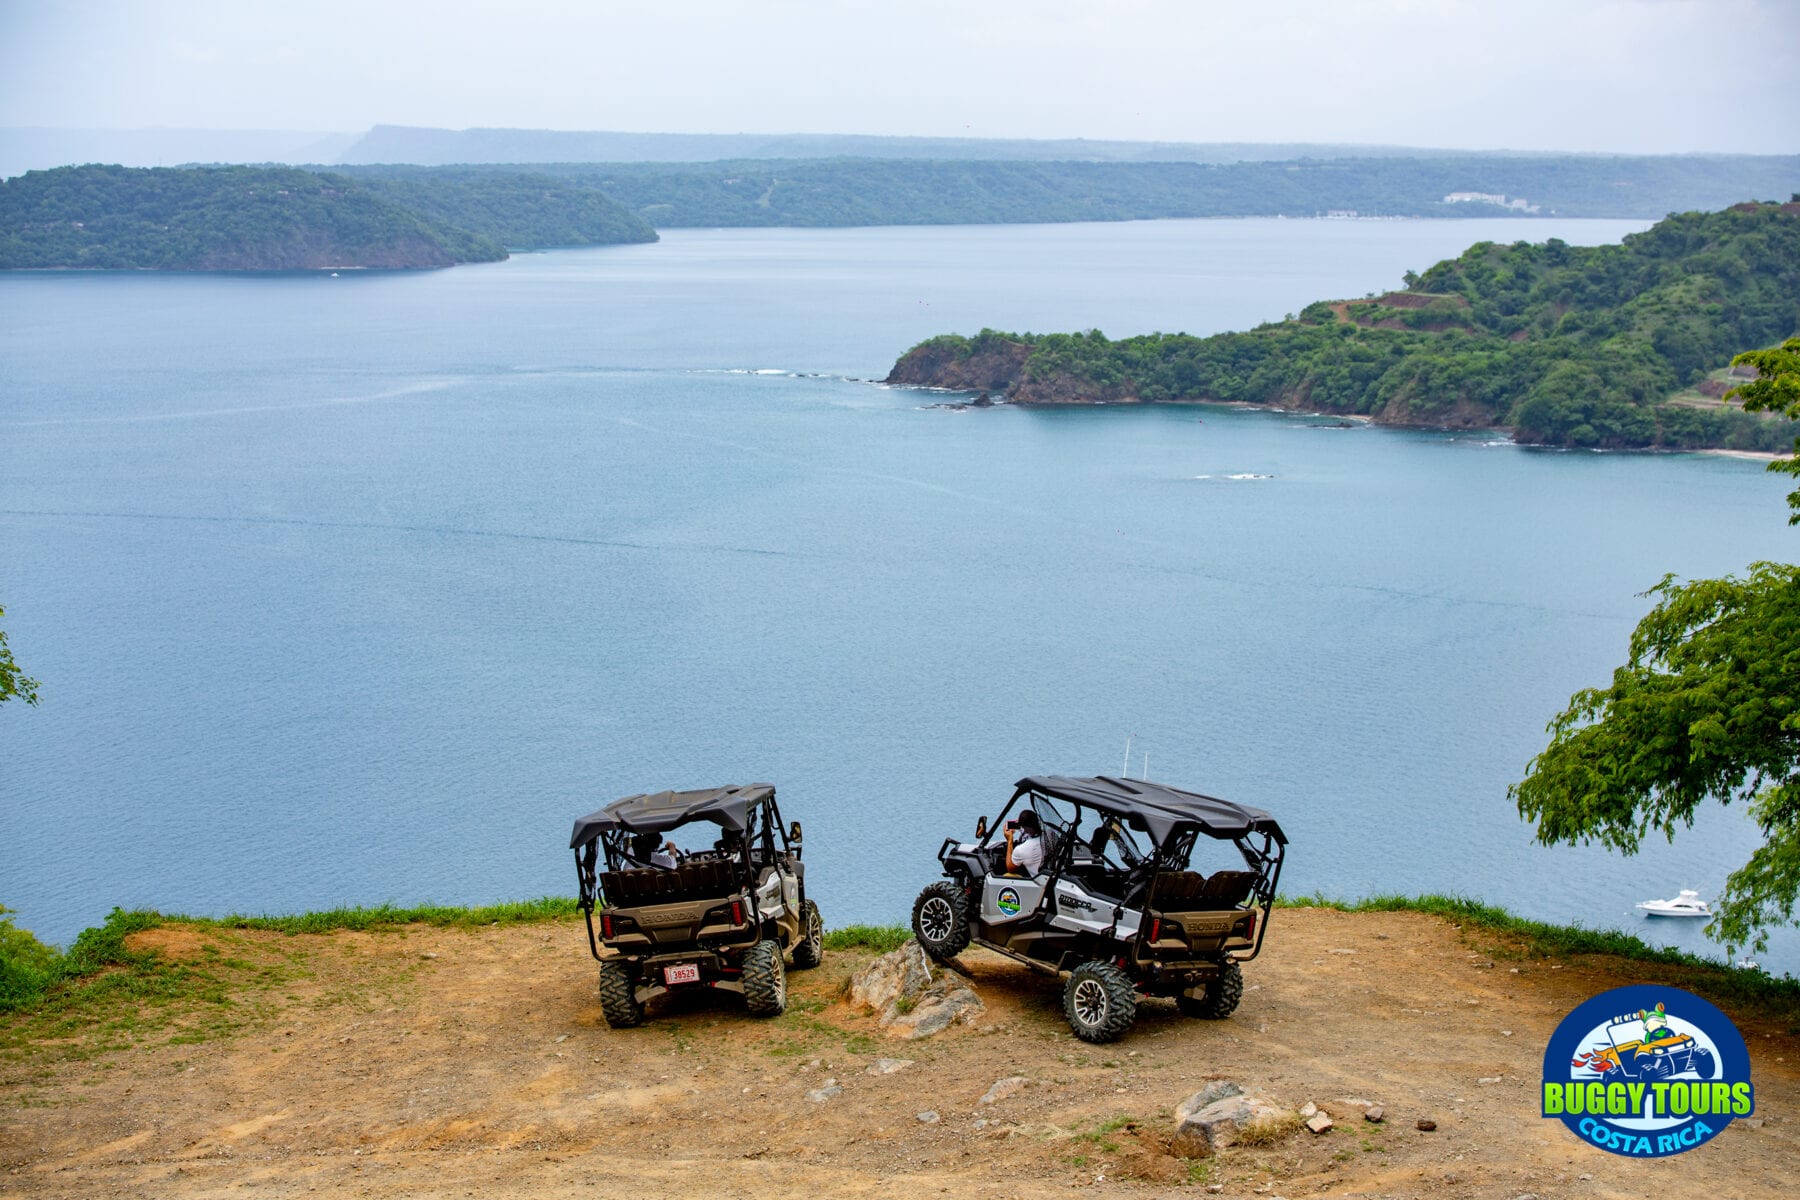 Tico tours side-by-side buggy